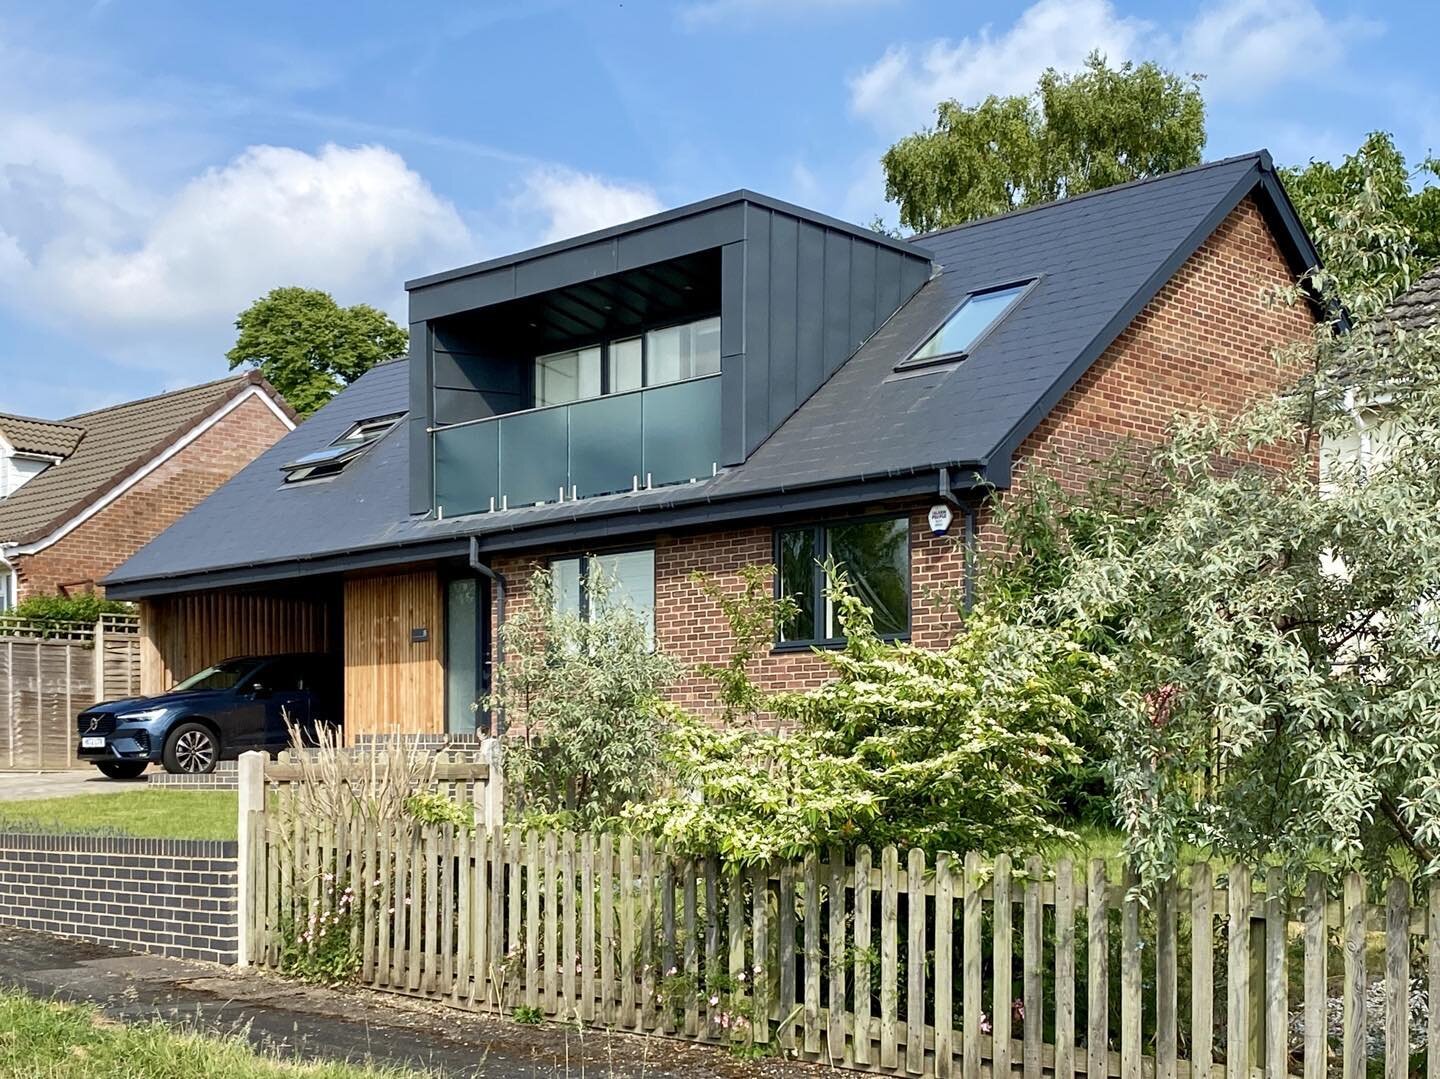 Sunnydown Road revisited.
It was lovely to go back and see how our Clients are enjoying their home in Olivers Battery recently.  Having lived in the extended and refurbished house for over a year now, our Clients are delighted with how the layout wor